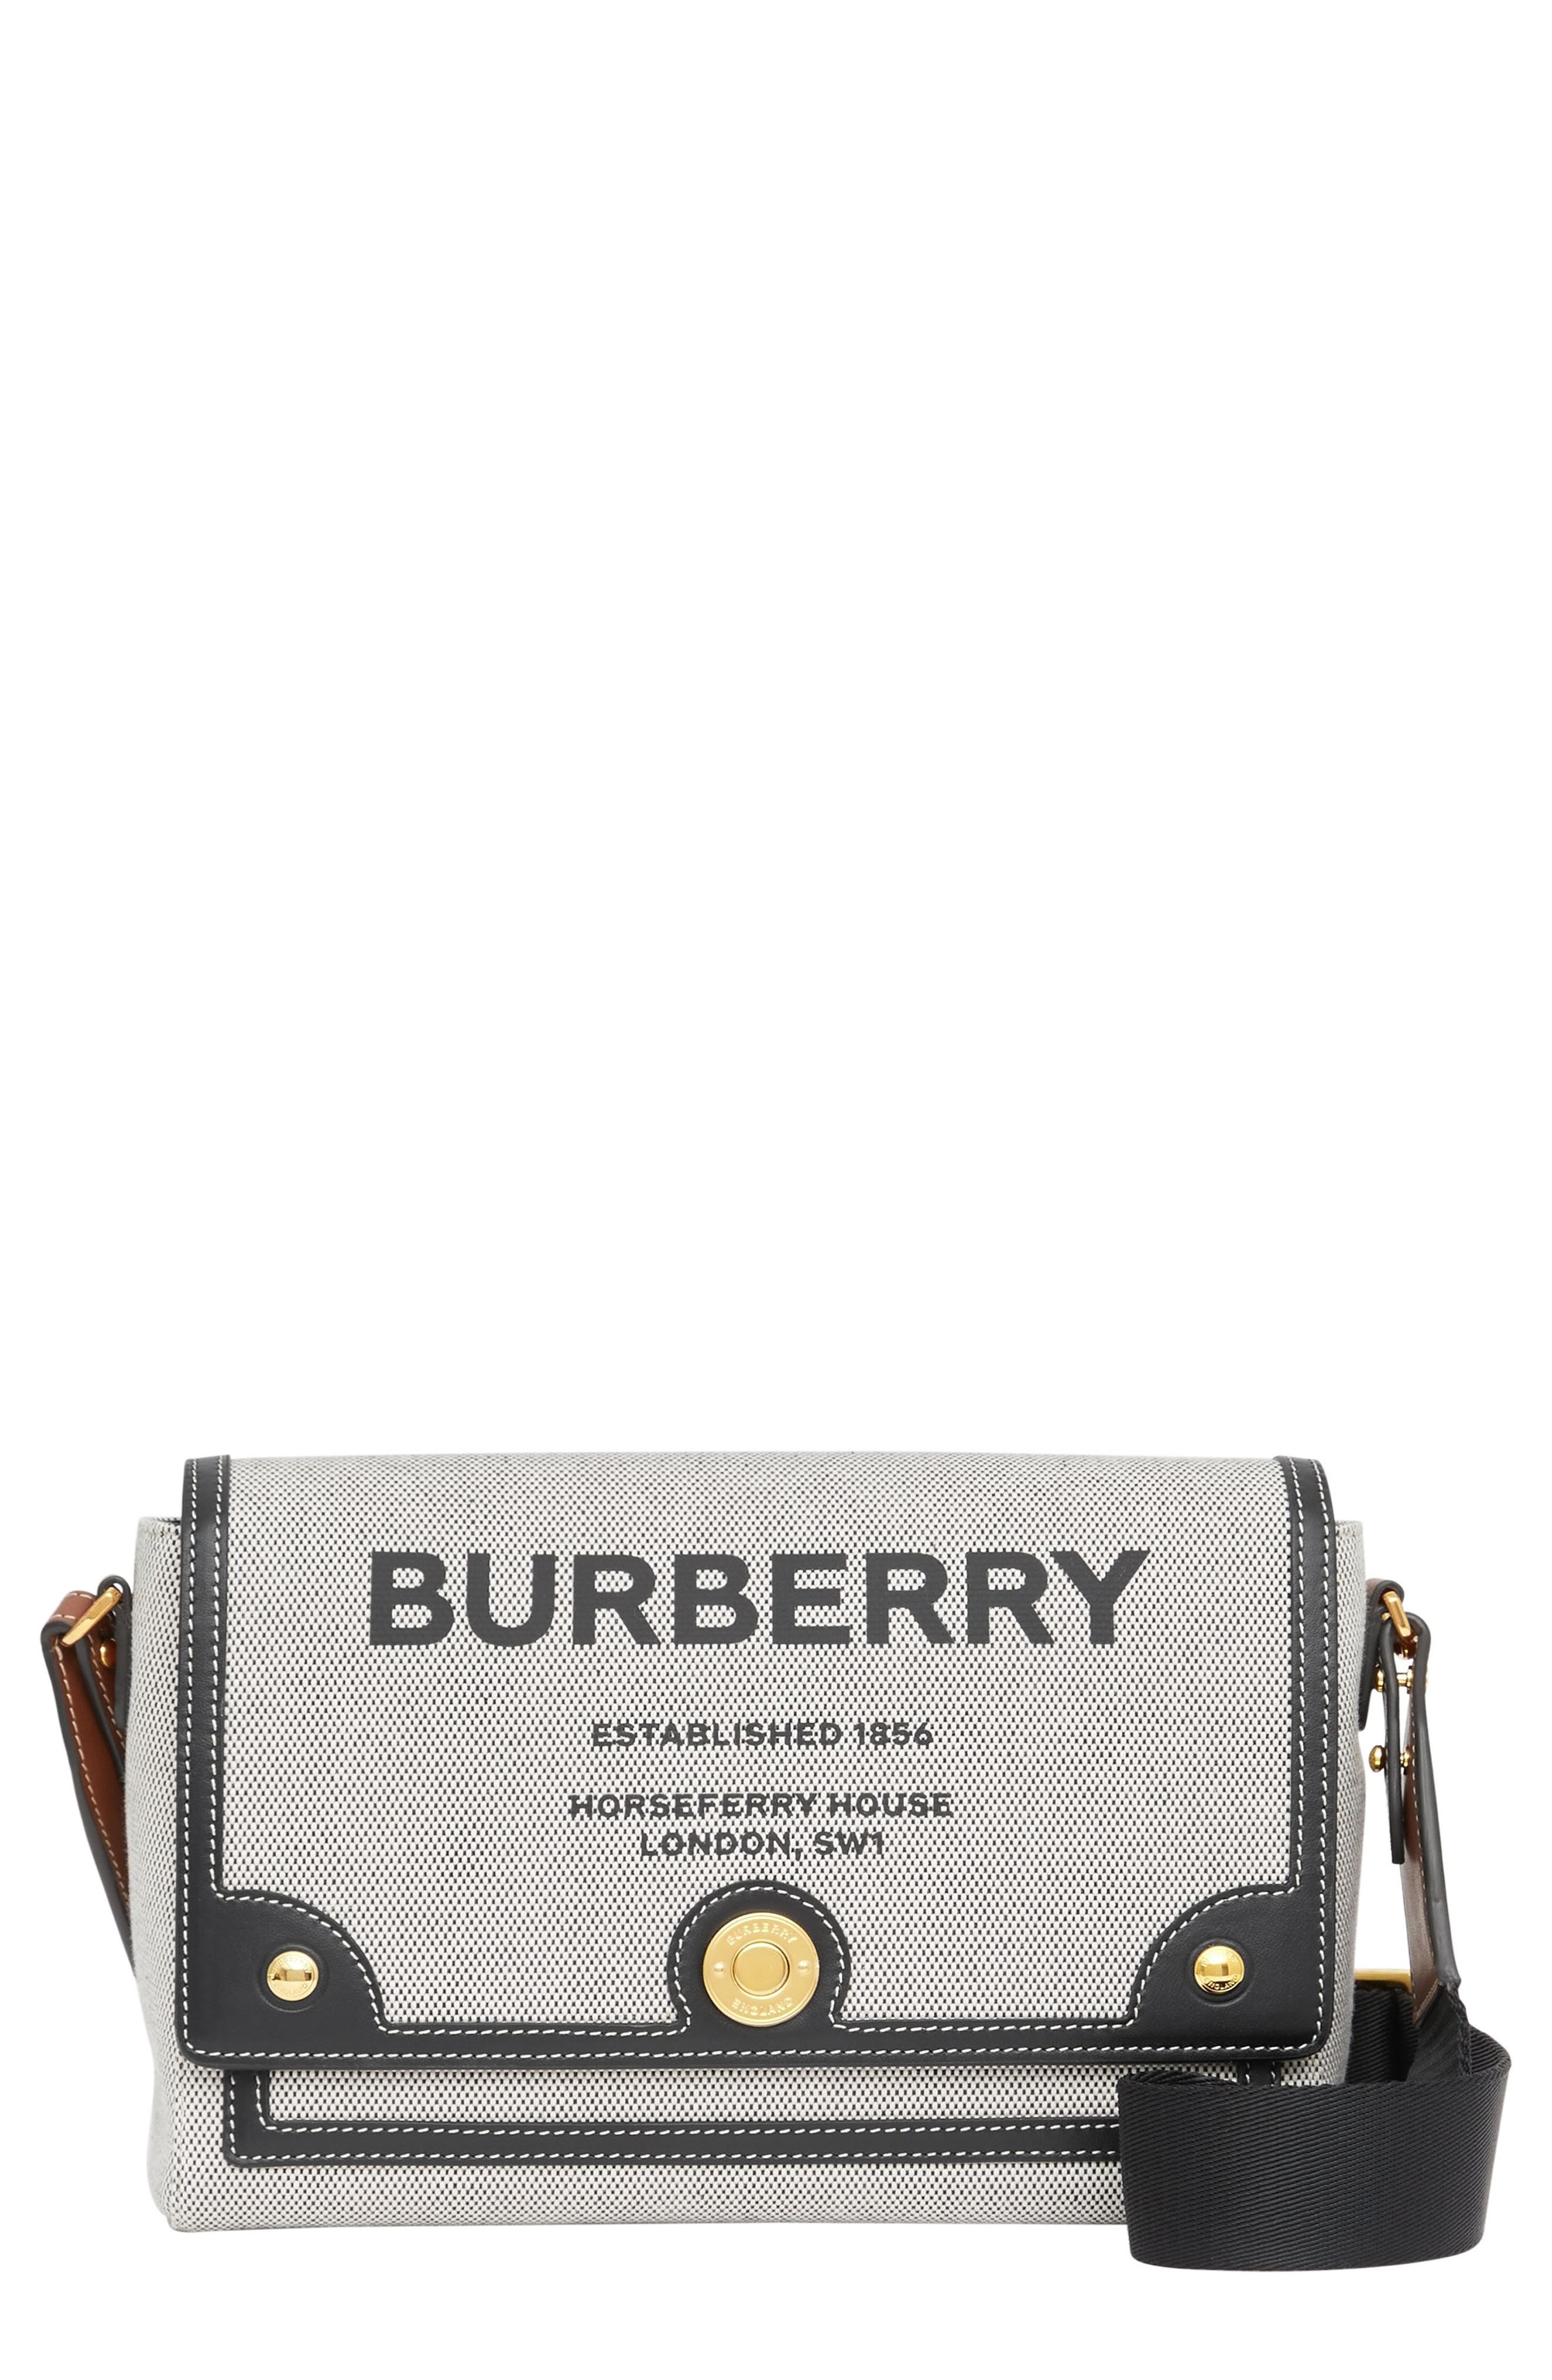 Burberry Medium Note Horseferry Print Canvas & Leather Crossbody Bag in Black/Tan at Nordstrom